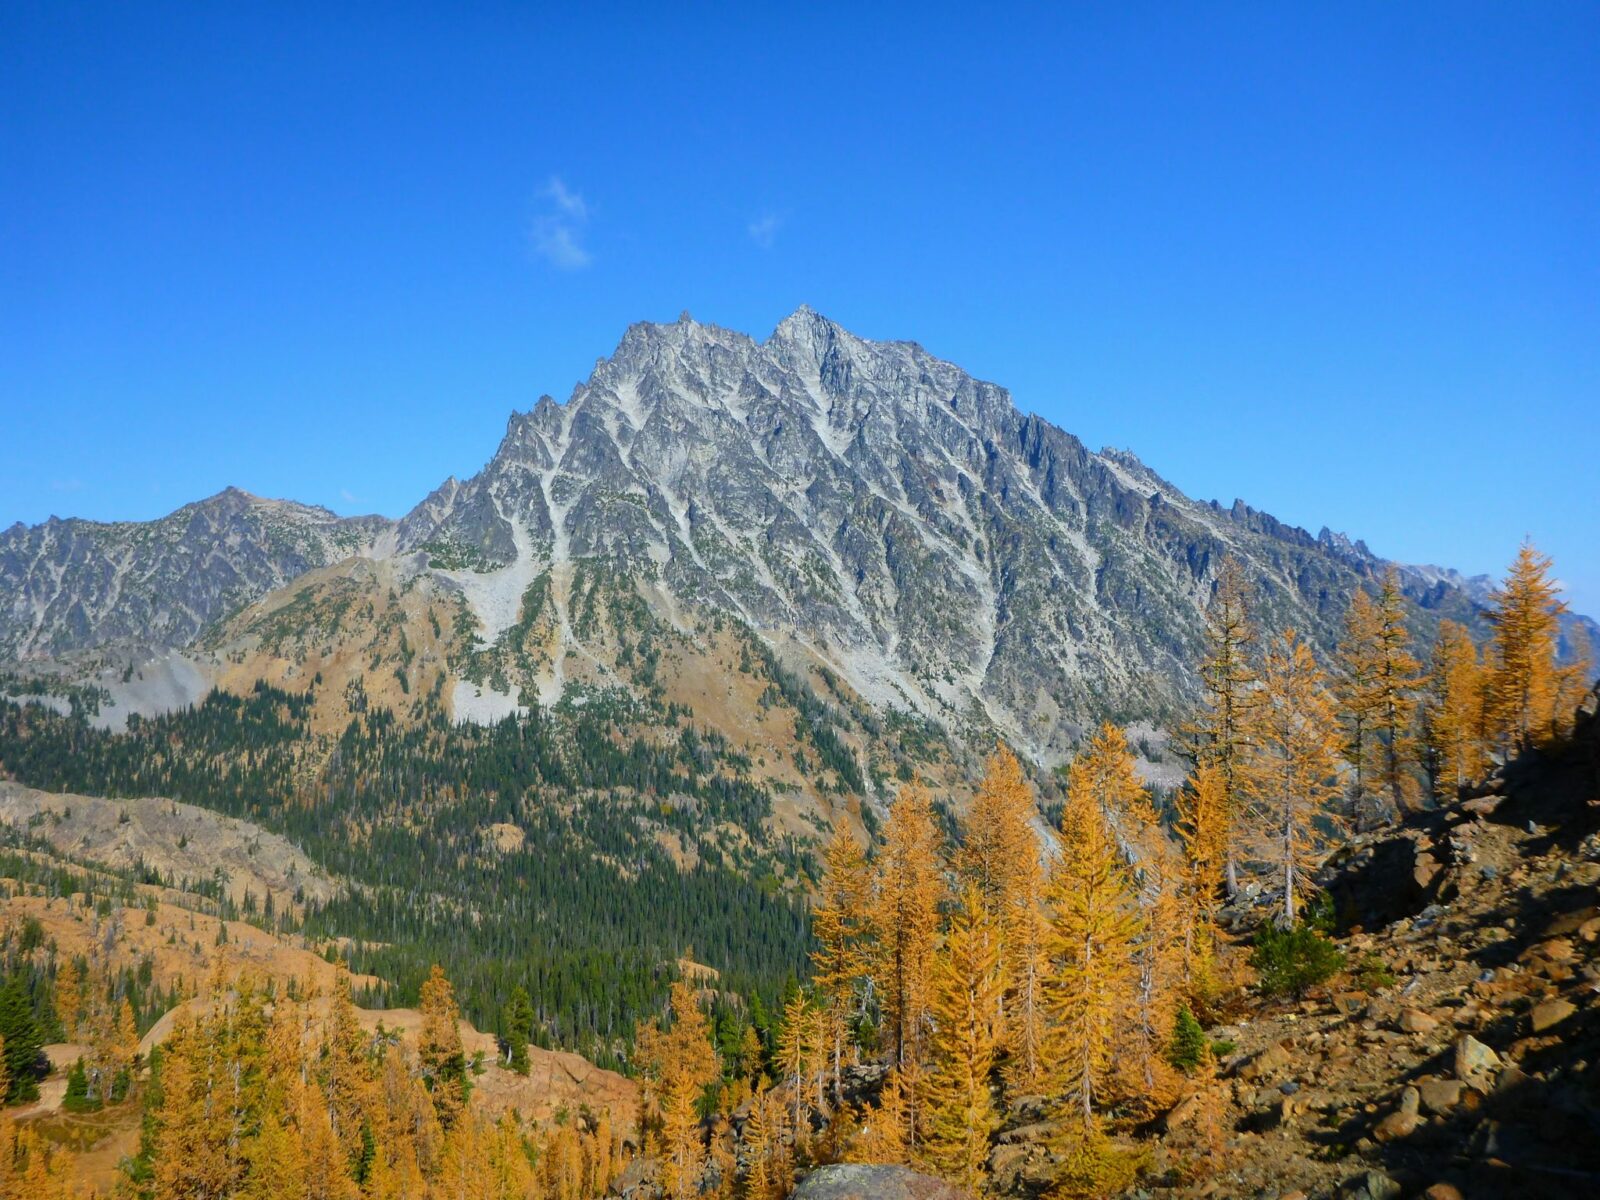 A high granite mountain against a blue sky. Golden larch trees frame the mountain in the foreground on one of the best larch hikes in washington, Lake Ingalls